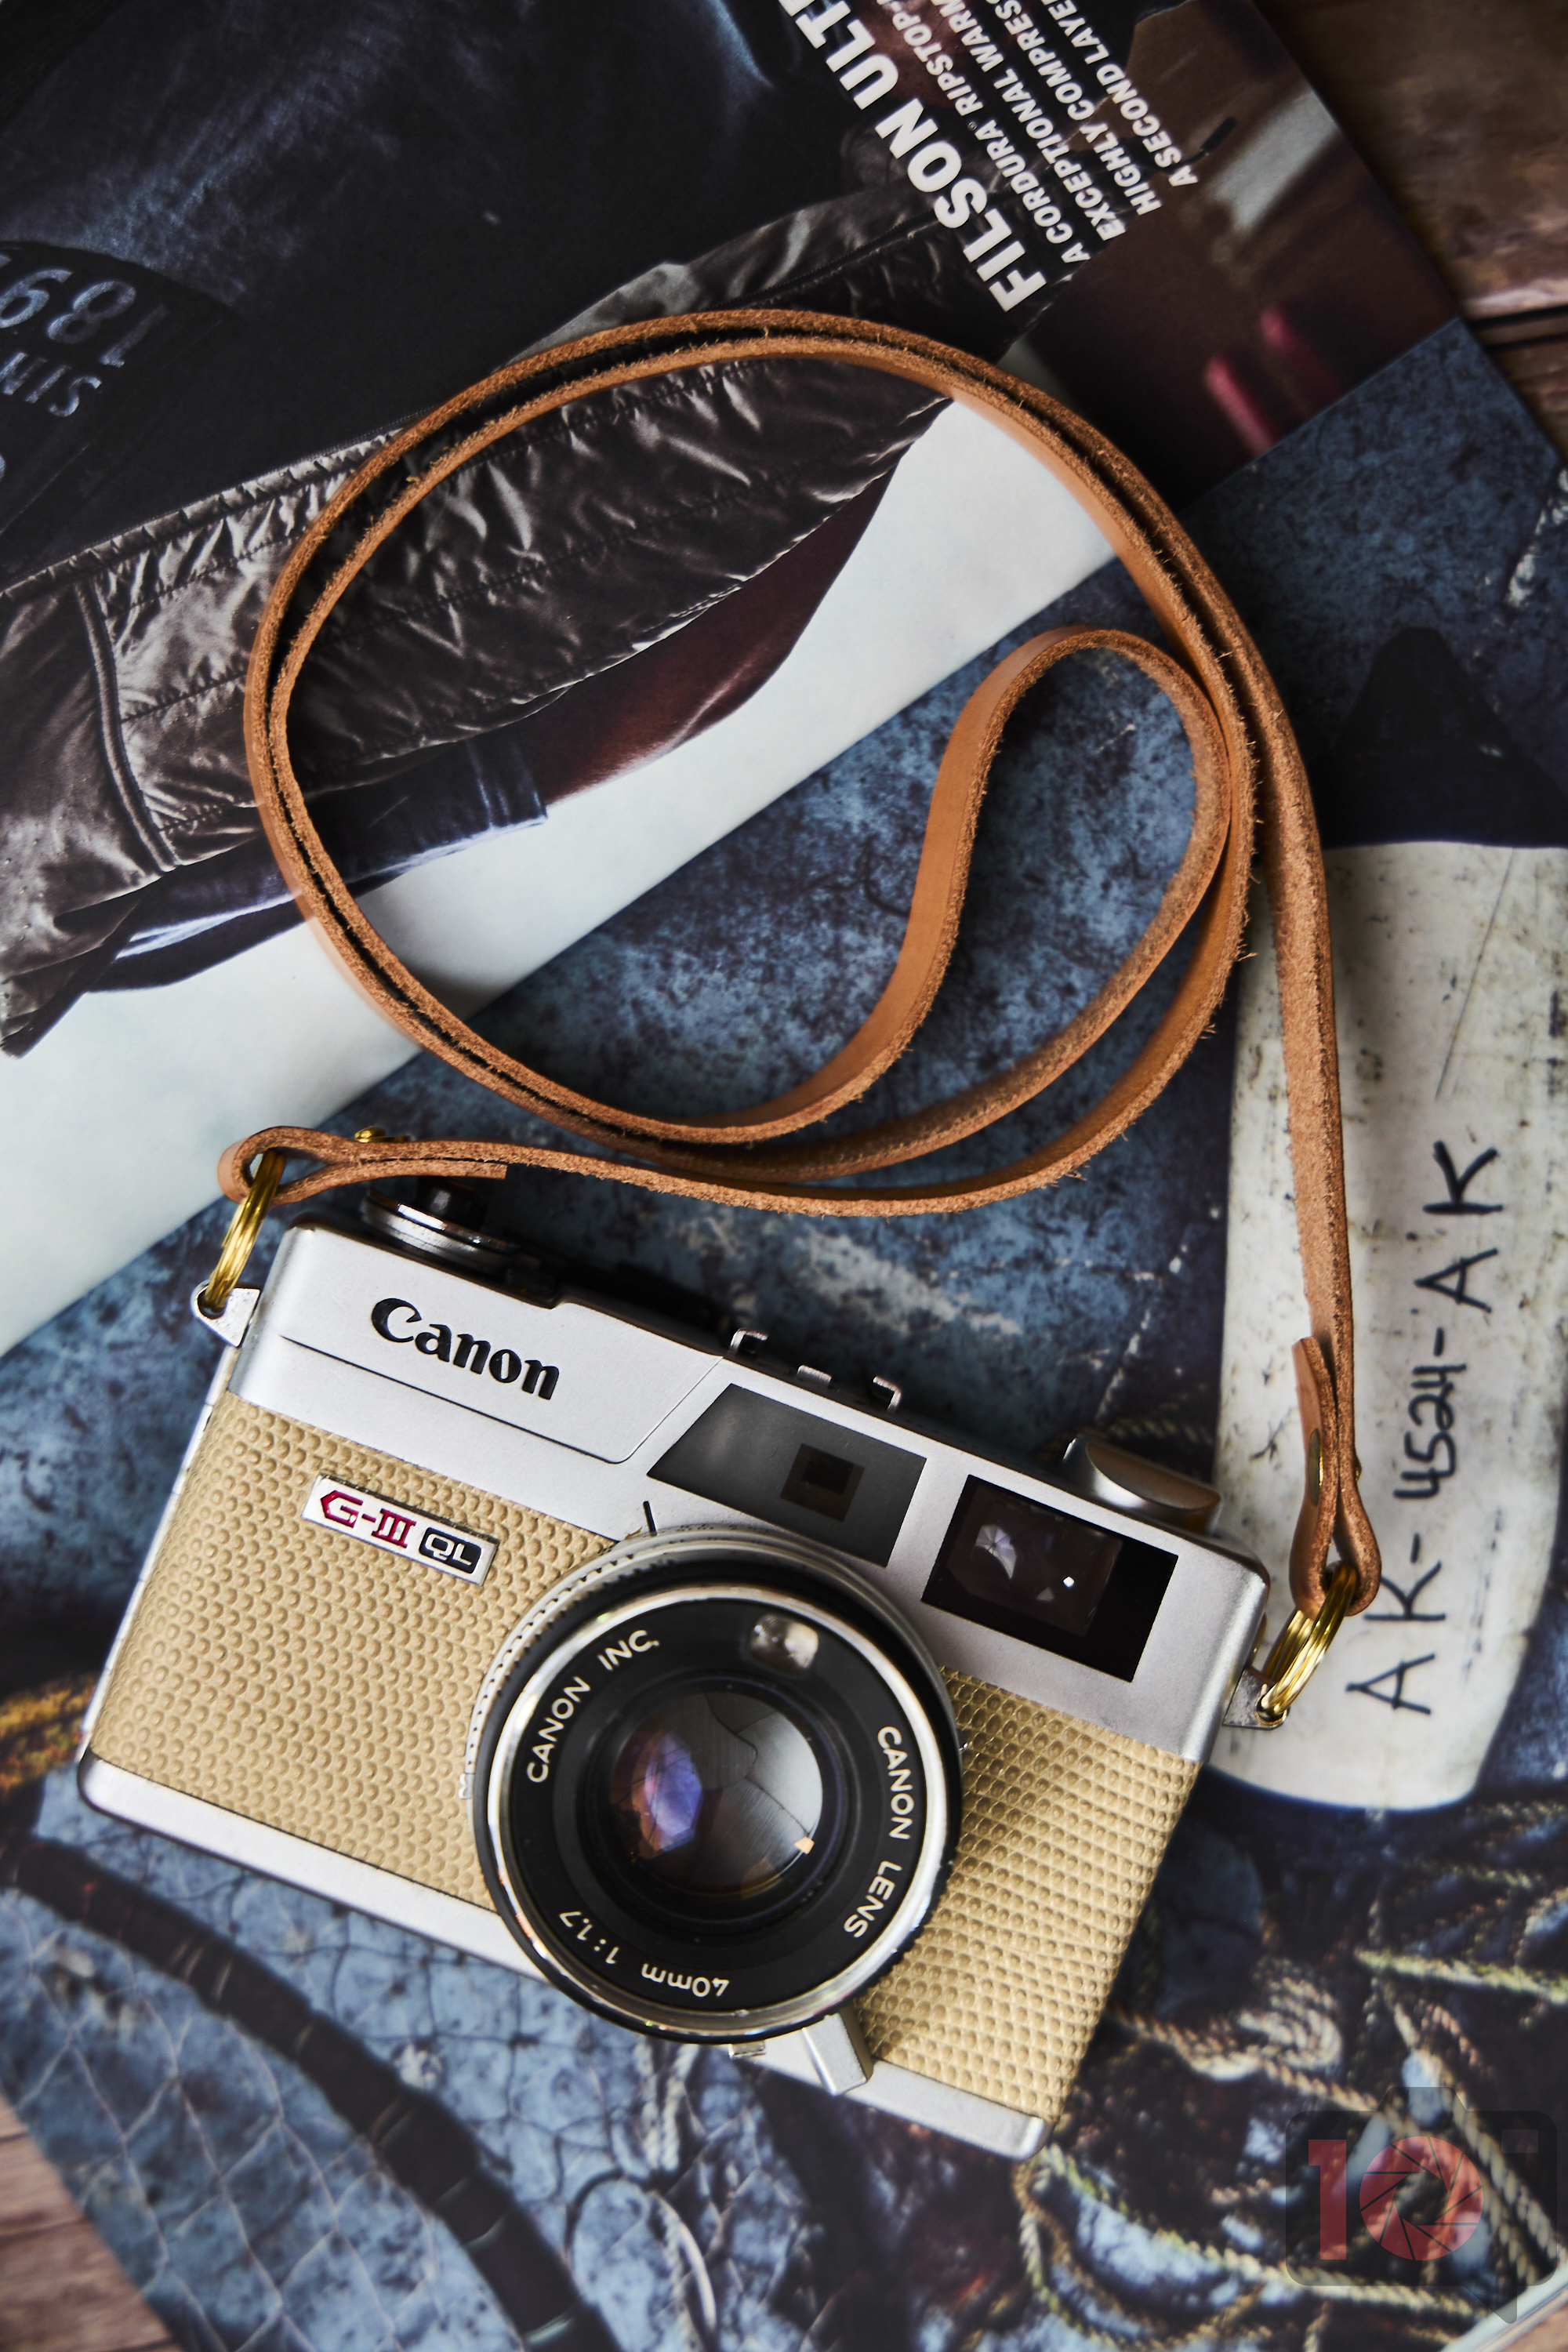 Chris Gampat The Phoblographer Field Work Slim Fixed Leather camera strap review product images 41-50s400 2